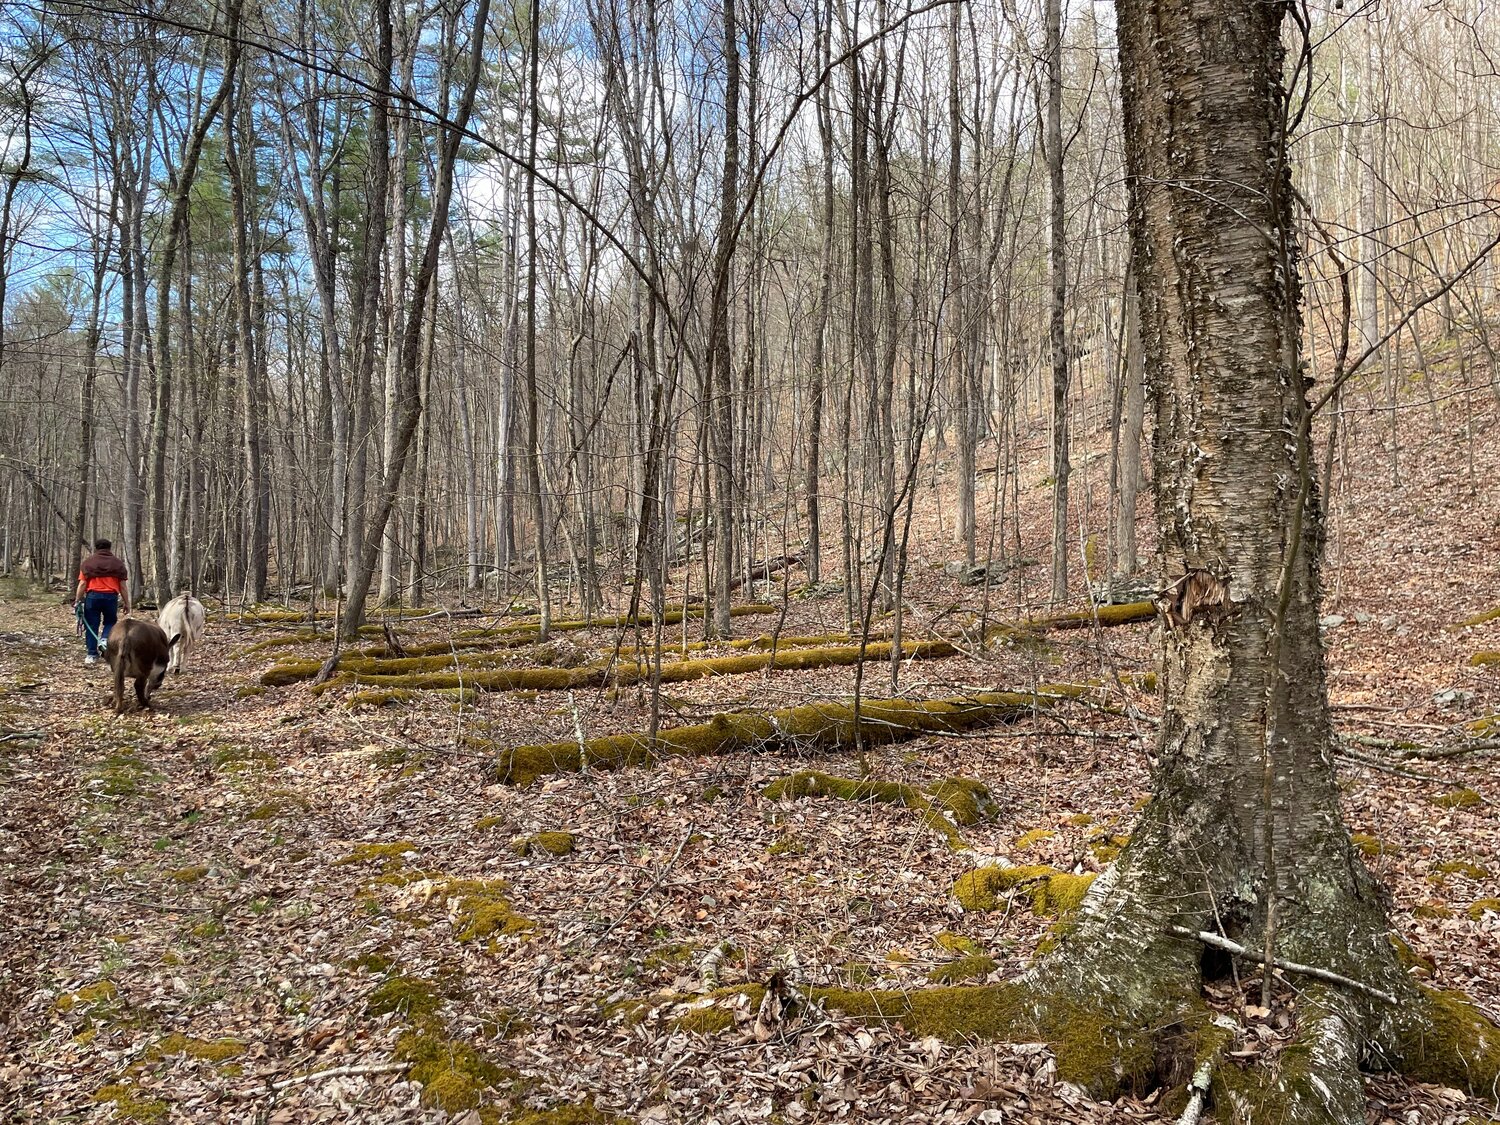 The Mark and Courtney Peterson Nature Preserve is The Preserve is situated near the Lackawaxen River, and is located along the eastern bank of the Little Blooming Grove Creek.  ..